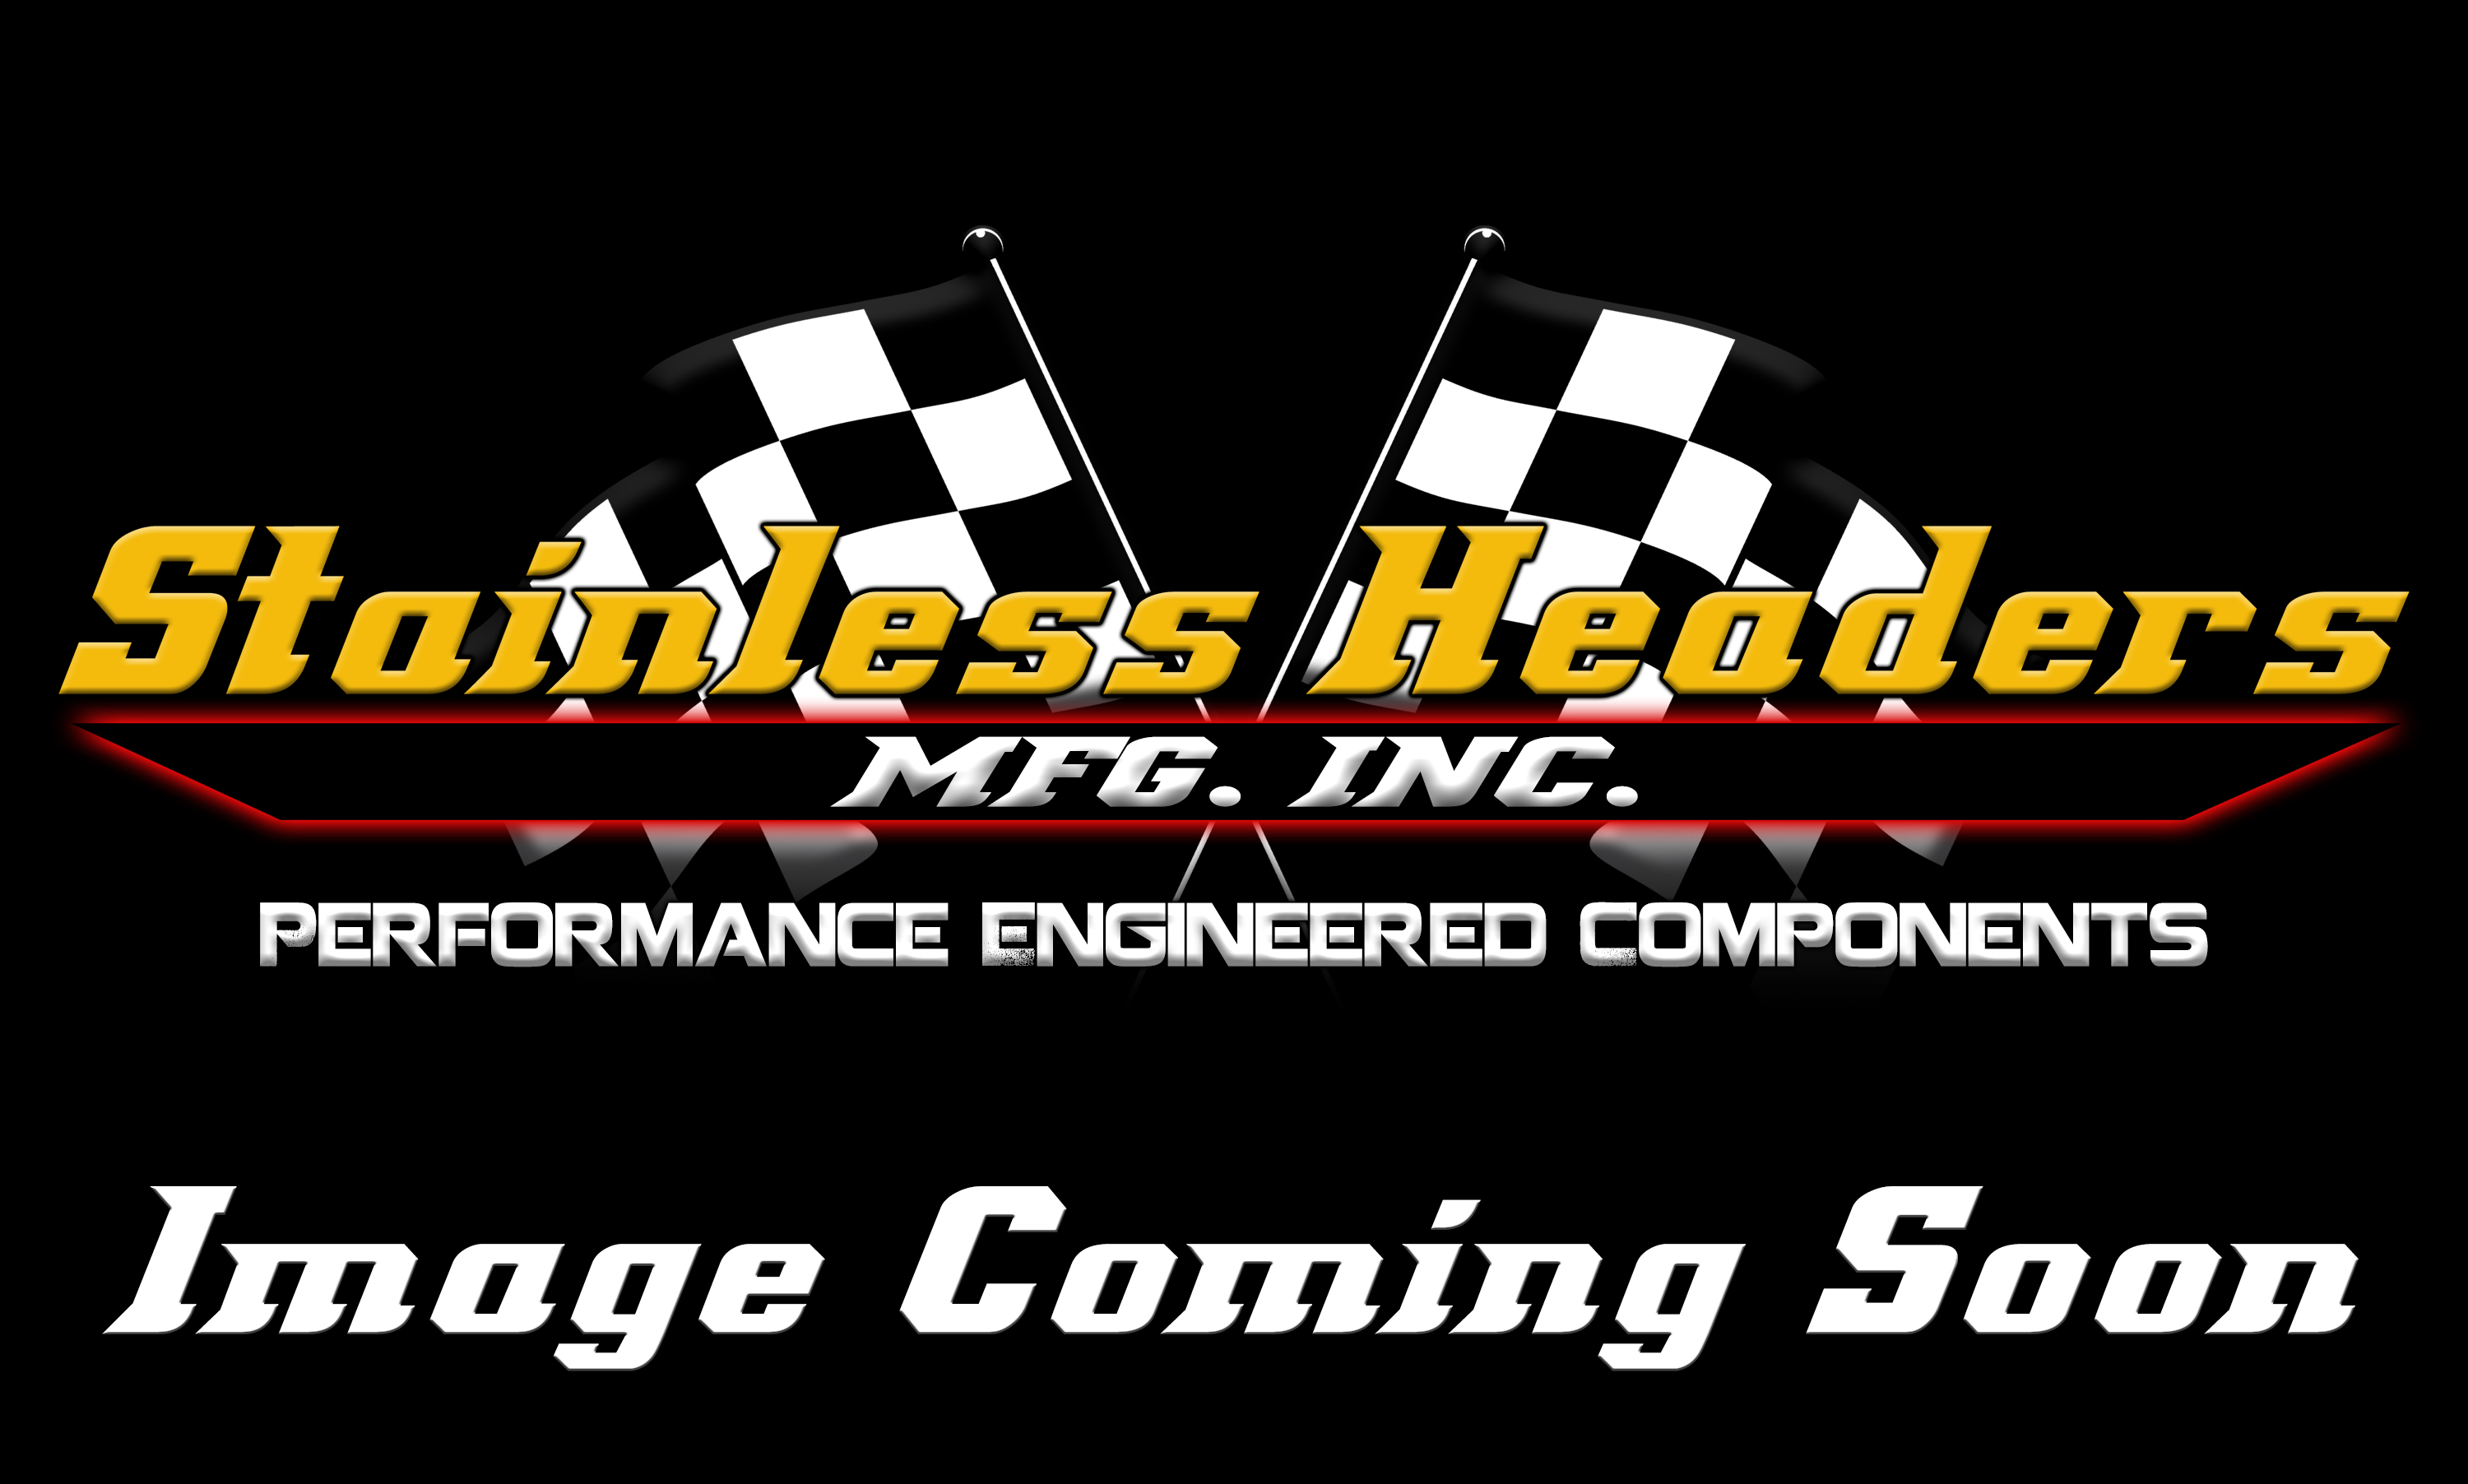 CompTurbo Technologies - CTR4518R-8388 Mid Frame 360 Journal Bearing Turbocharger (1500 HP) - Image 2